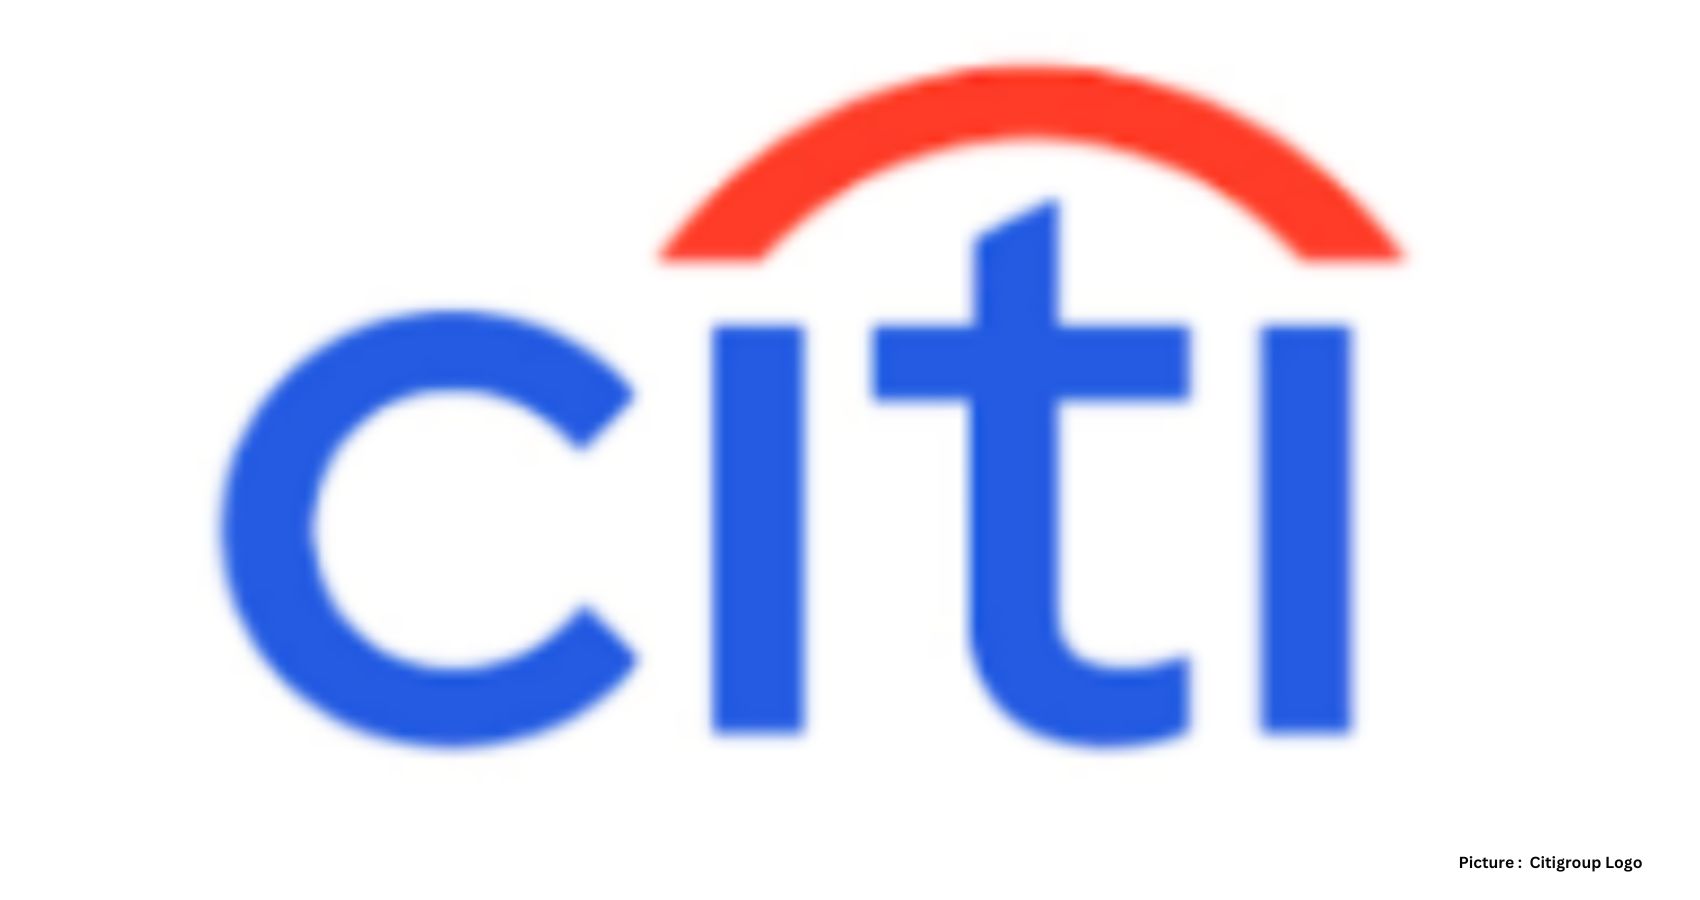 Viswas Raghavan Appointed Head of Banking and Executive Vice Chair at Citigroup